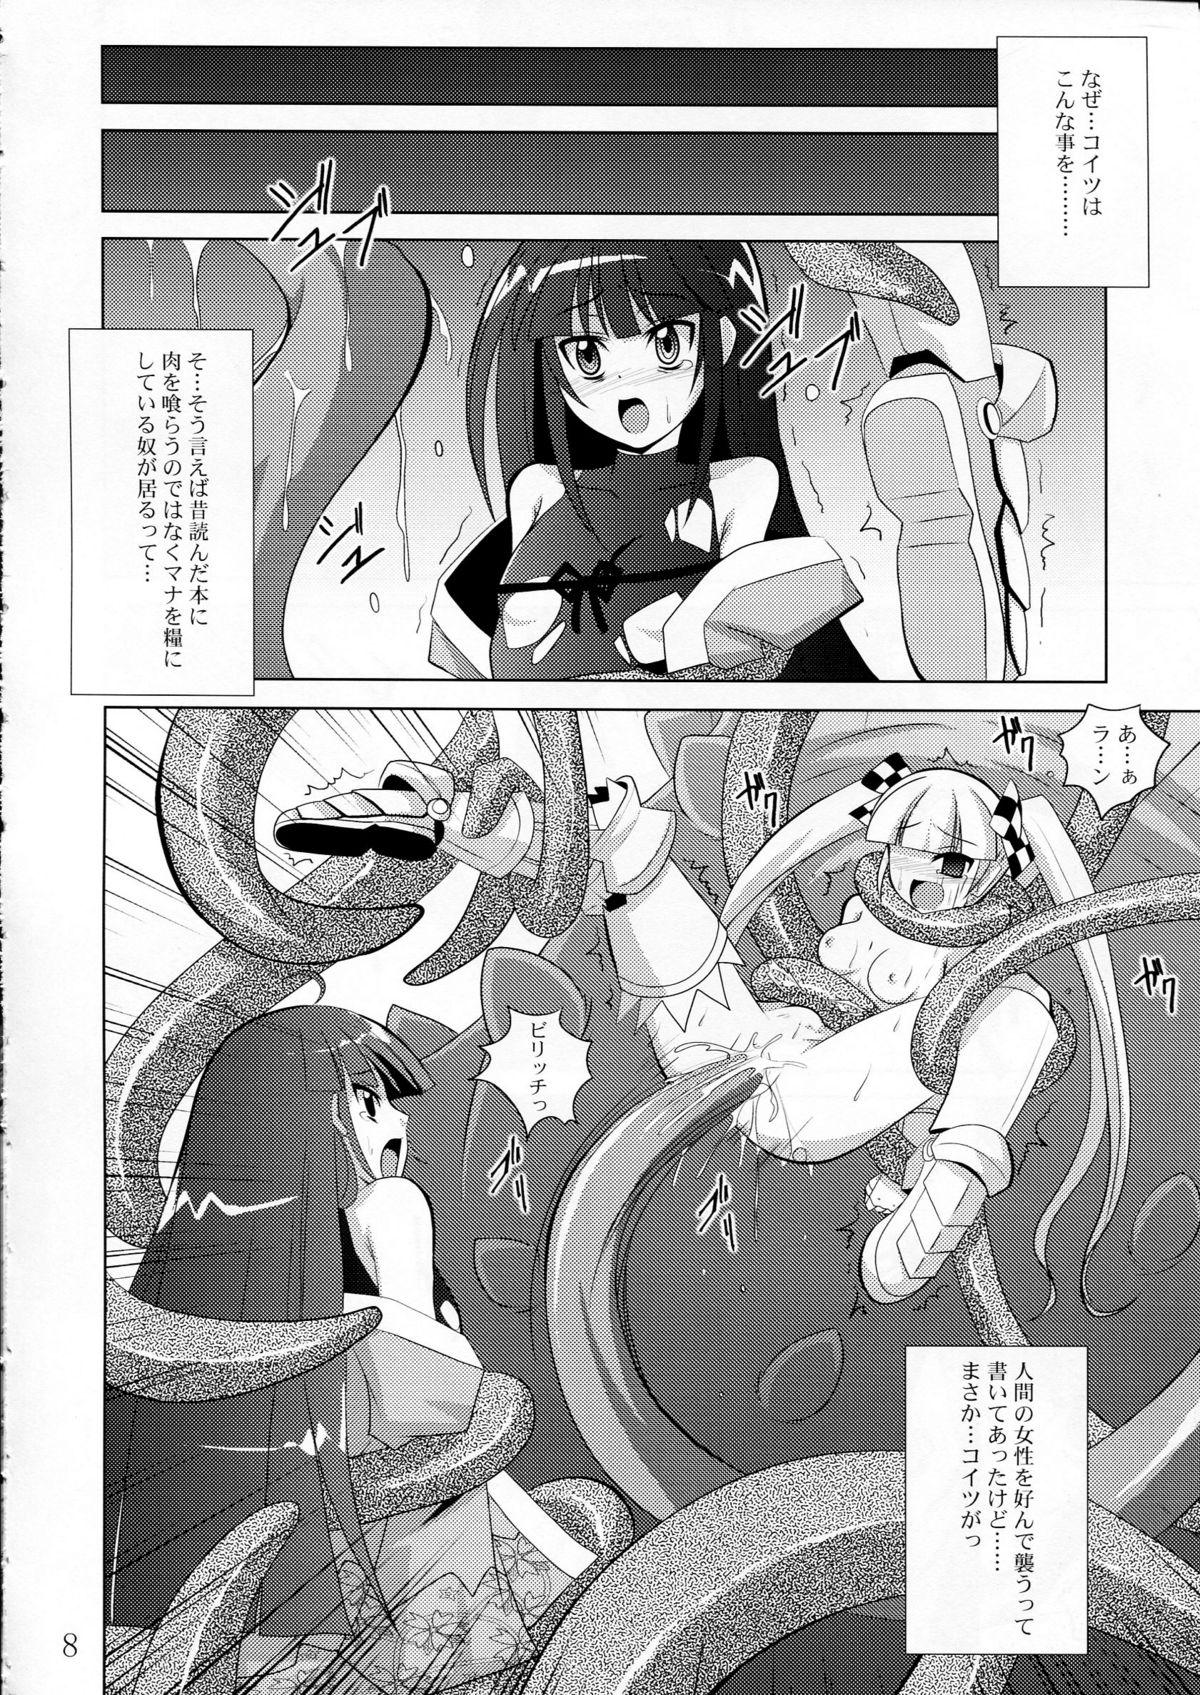 Indoor physical - 7th dragon Stripping - Page 7